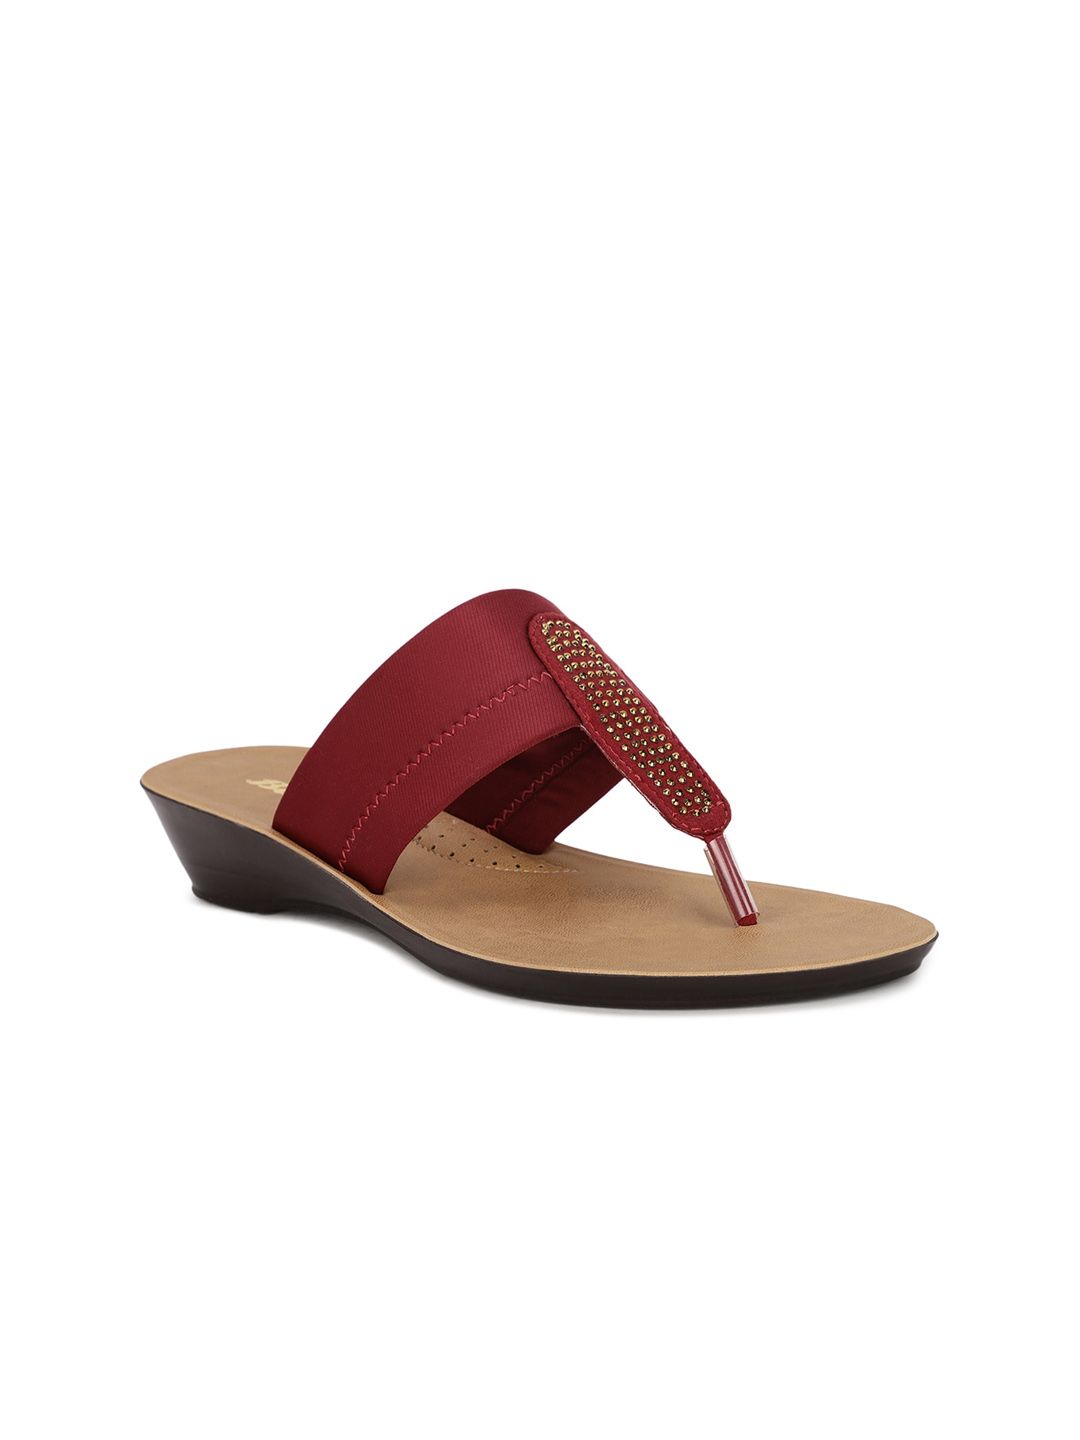 Bata Women Maroon Embellished T-Strap Flats Price in India